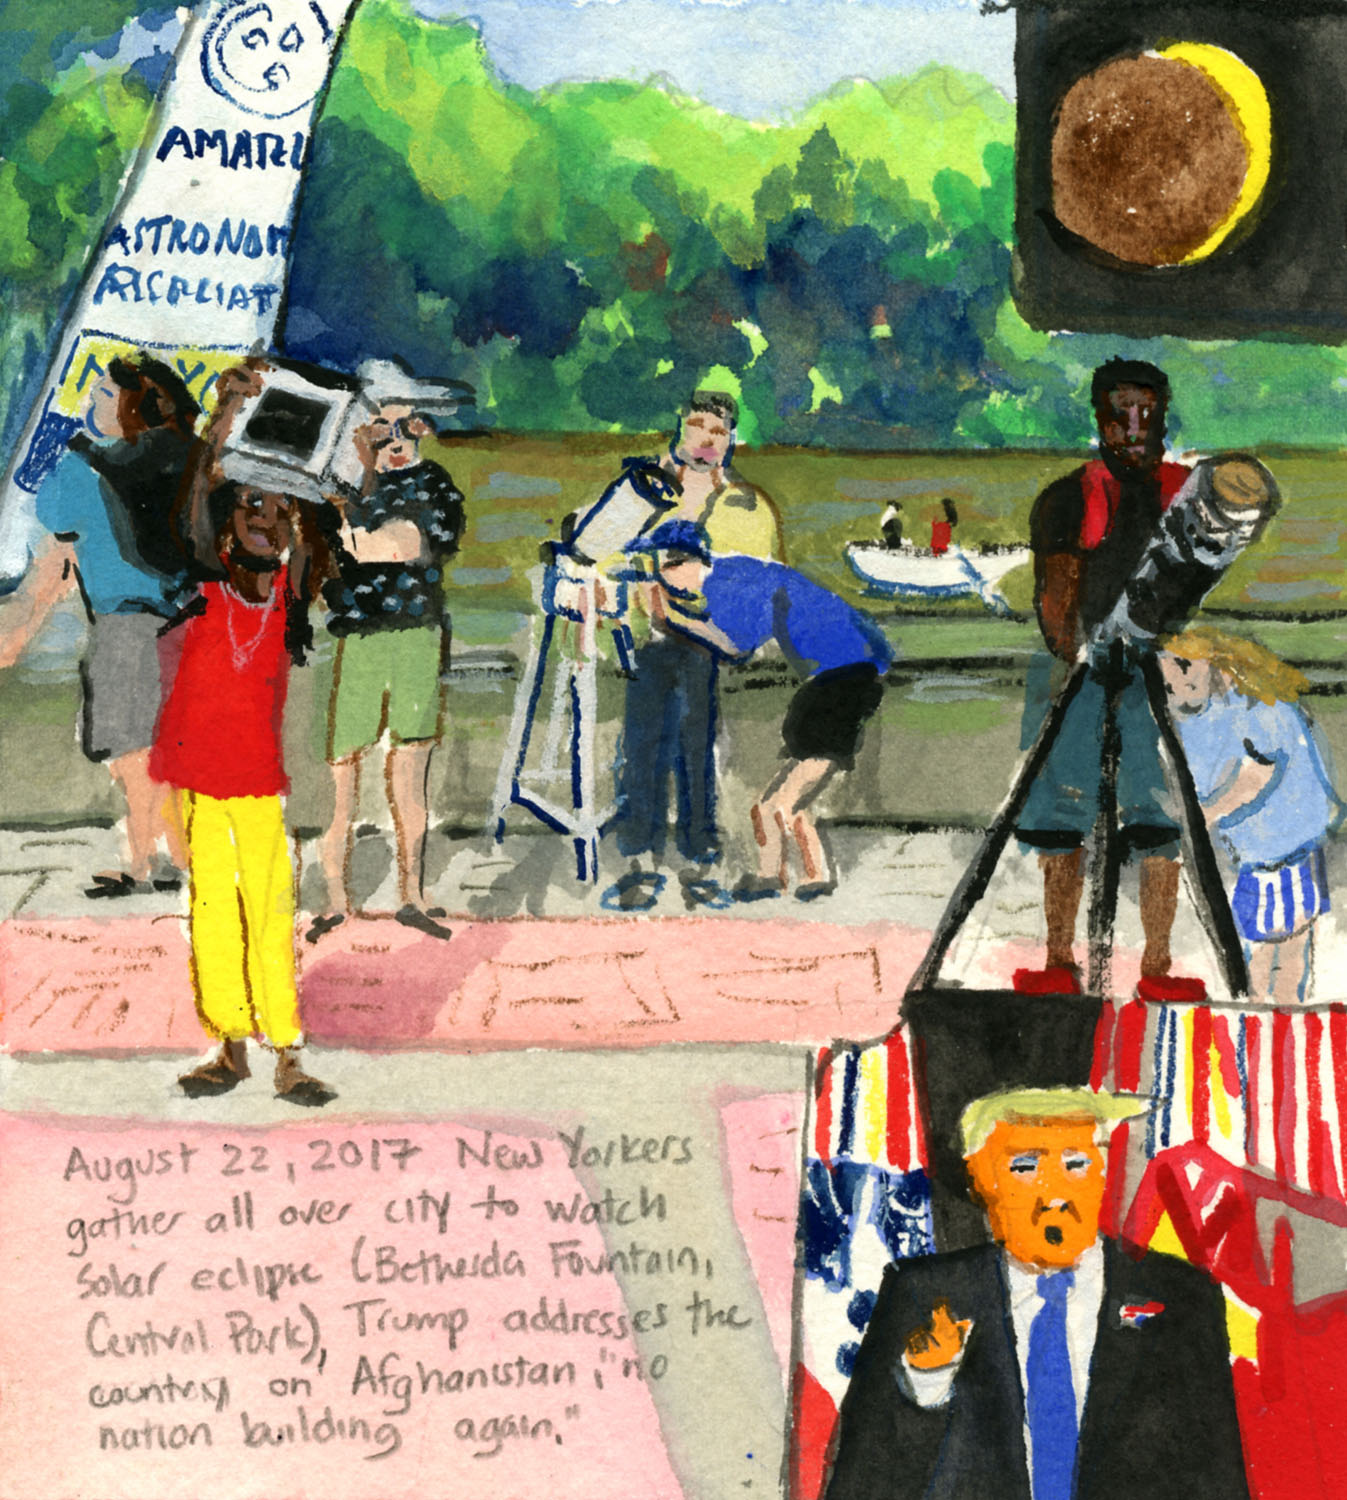 Day 640 (Aug. 22, 2017) <br>Watercolor, gouache, graphite on paper, 6 x 5 ½ in. <br><i>New Yorkers gather all over city to watch solar eclipse (Bethesda Fountain, Central Park), Trump addresses the country on Afghanistan, “no nation building again.”</i>